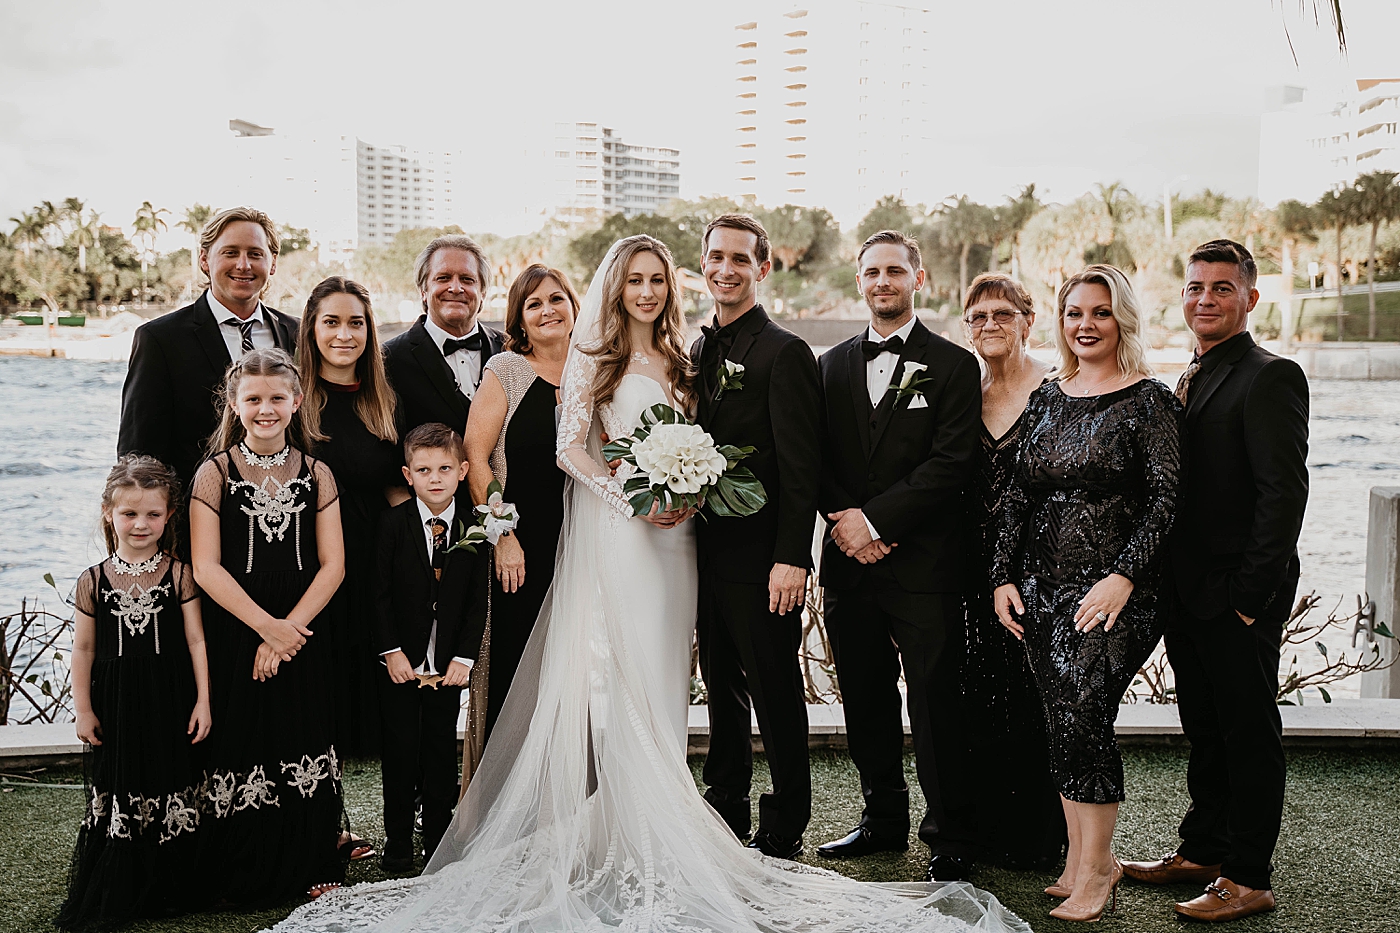 Family portraits by the ocean view Waterstone Resort and Marina Wedding captured by South Florida Wedding Photographer Krystal Capone Photography